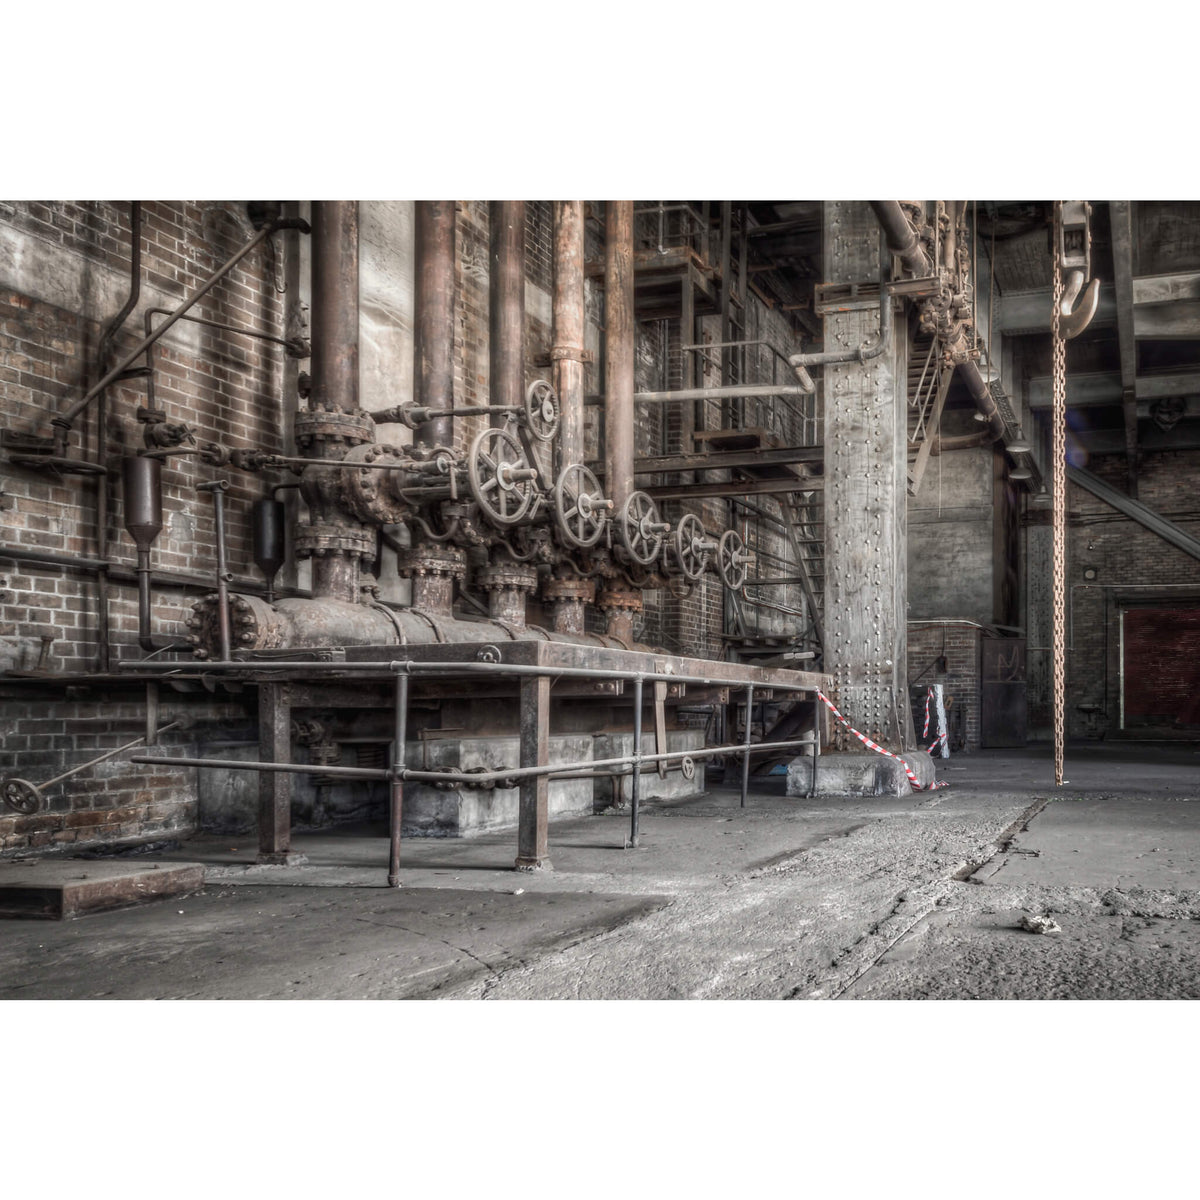 Boiler Feed Valves | White Bay Power Station Fine Art Print - Lost Collective Shop